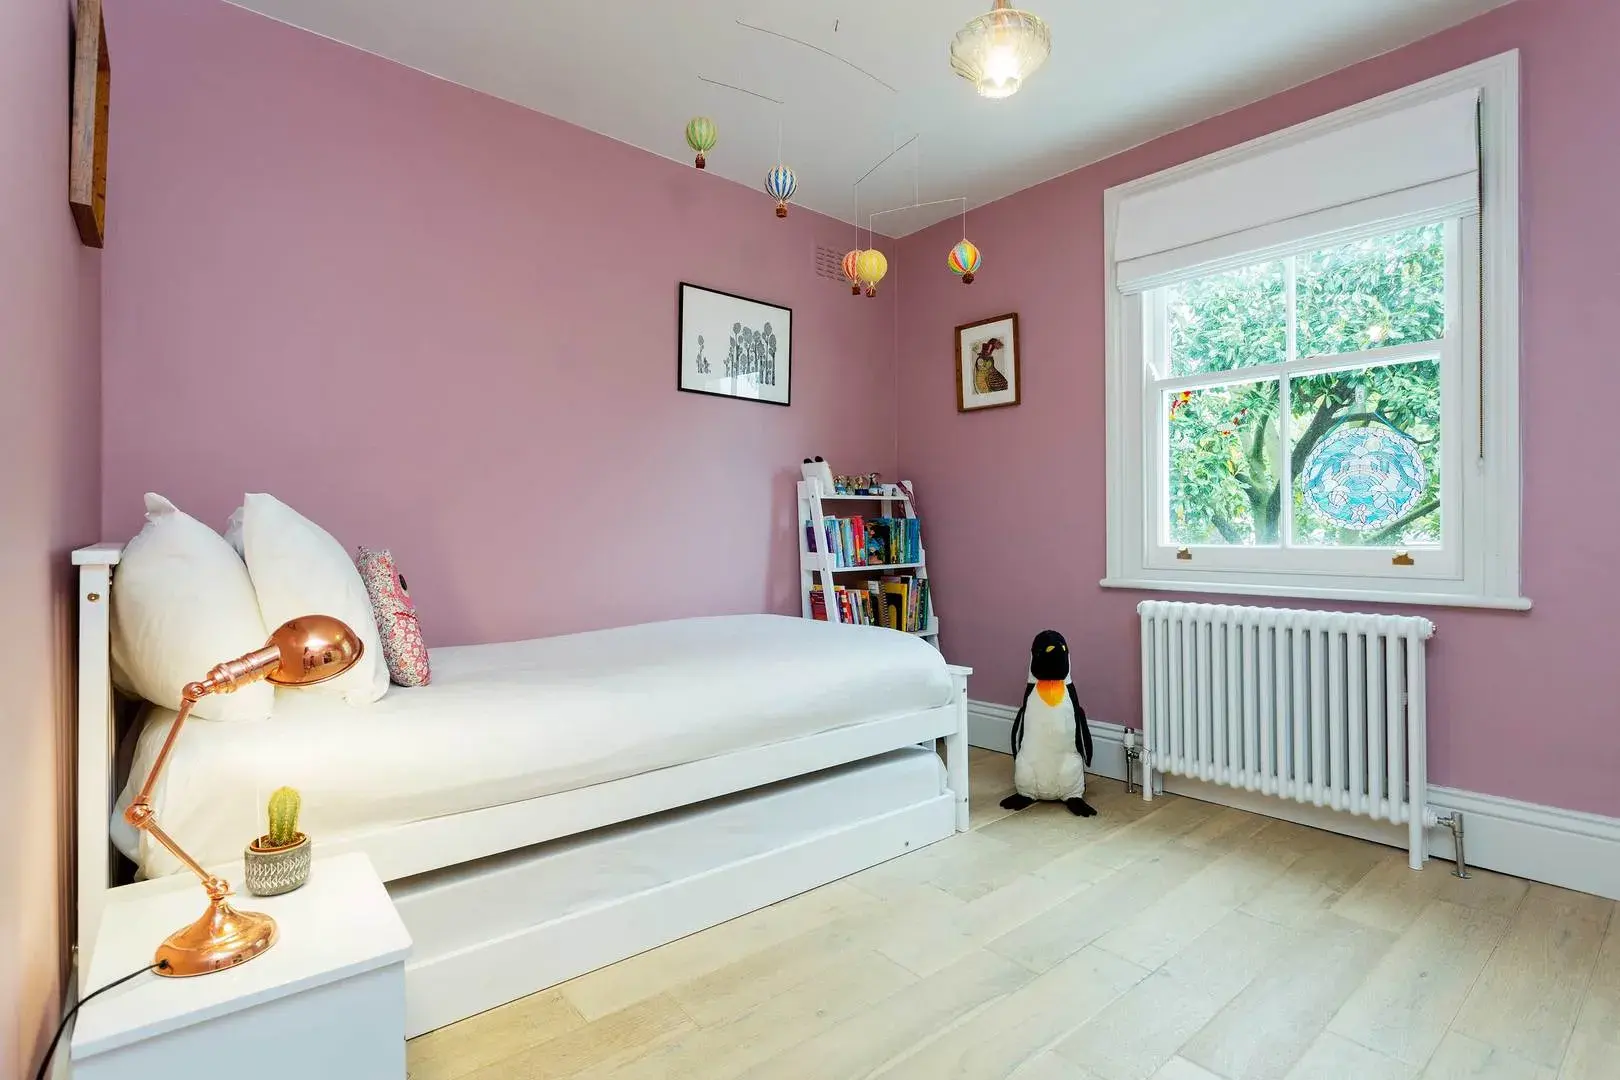 Melgund Road, holiday home in Islington, London